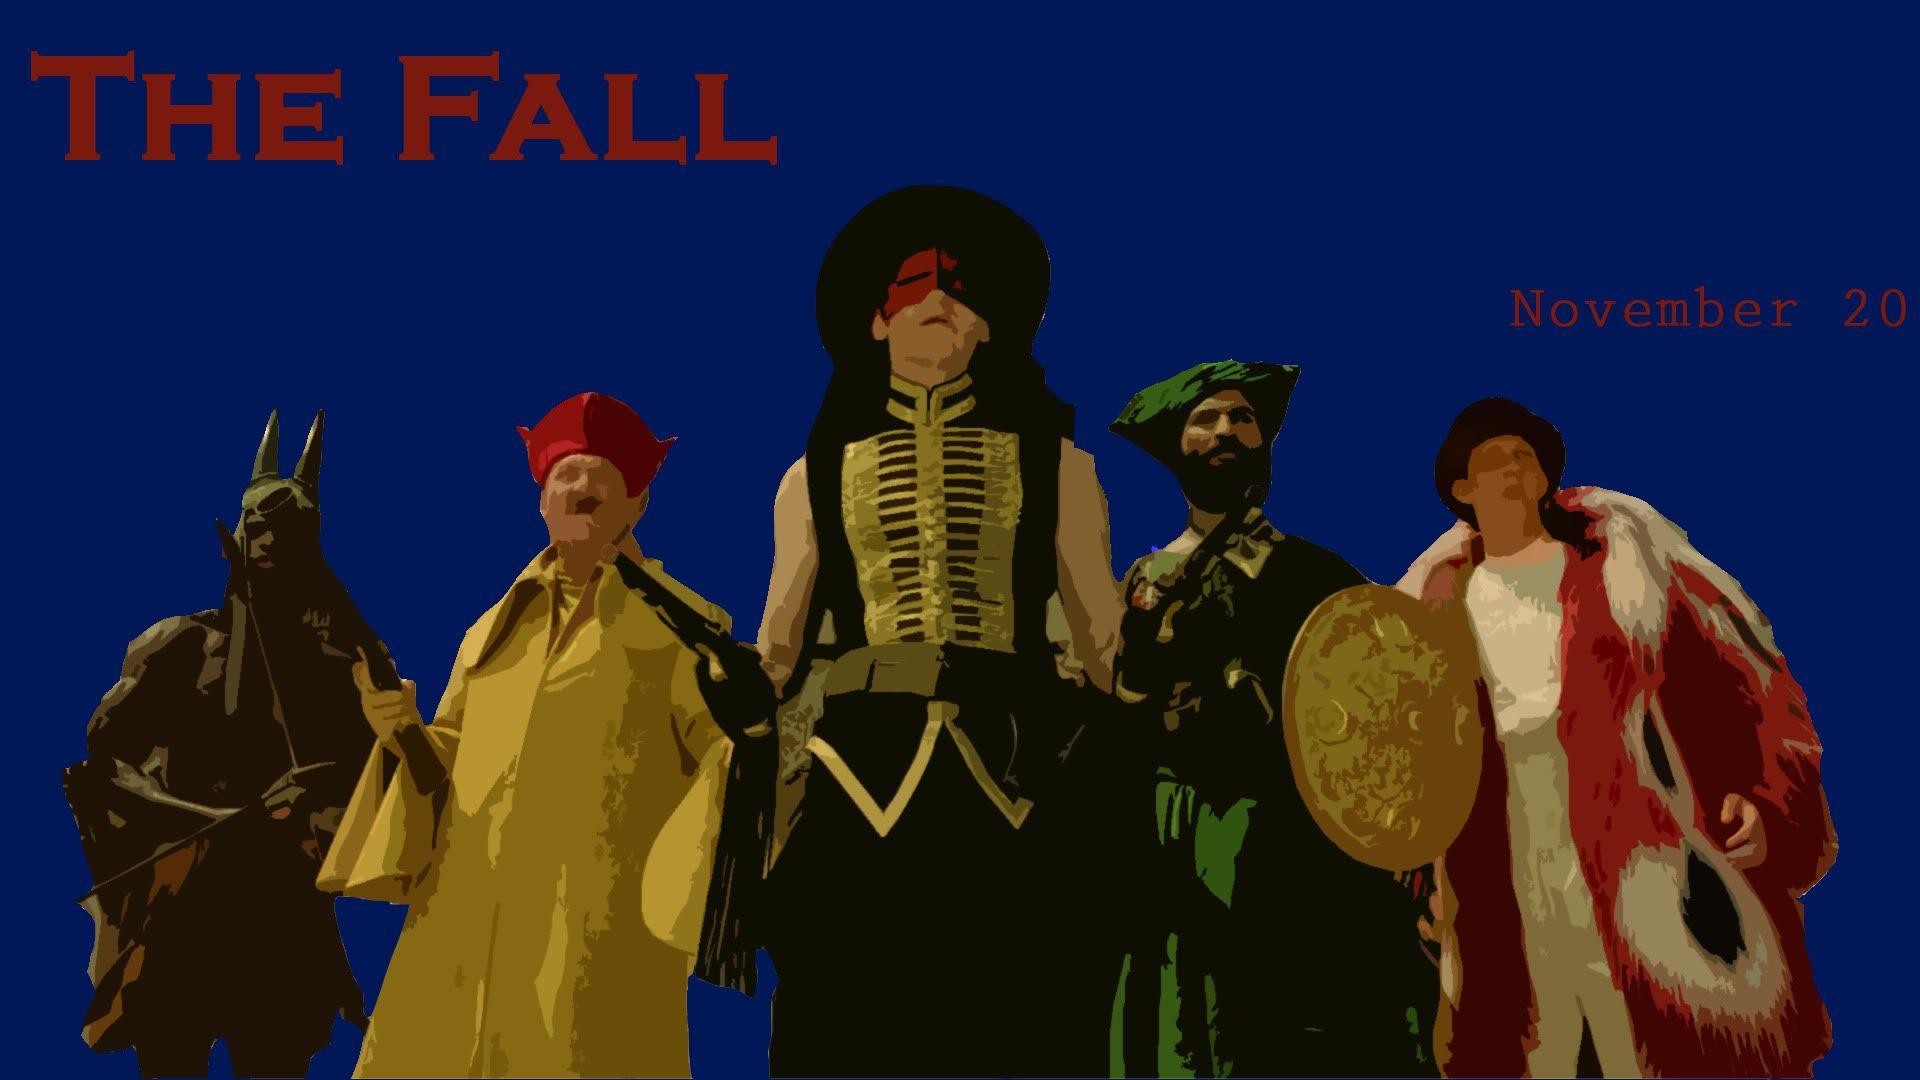 1920x1080 The Fall Wallpaper - Viewing Gallery